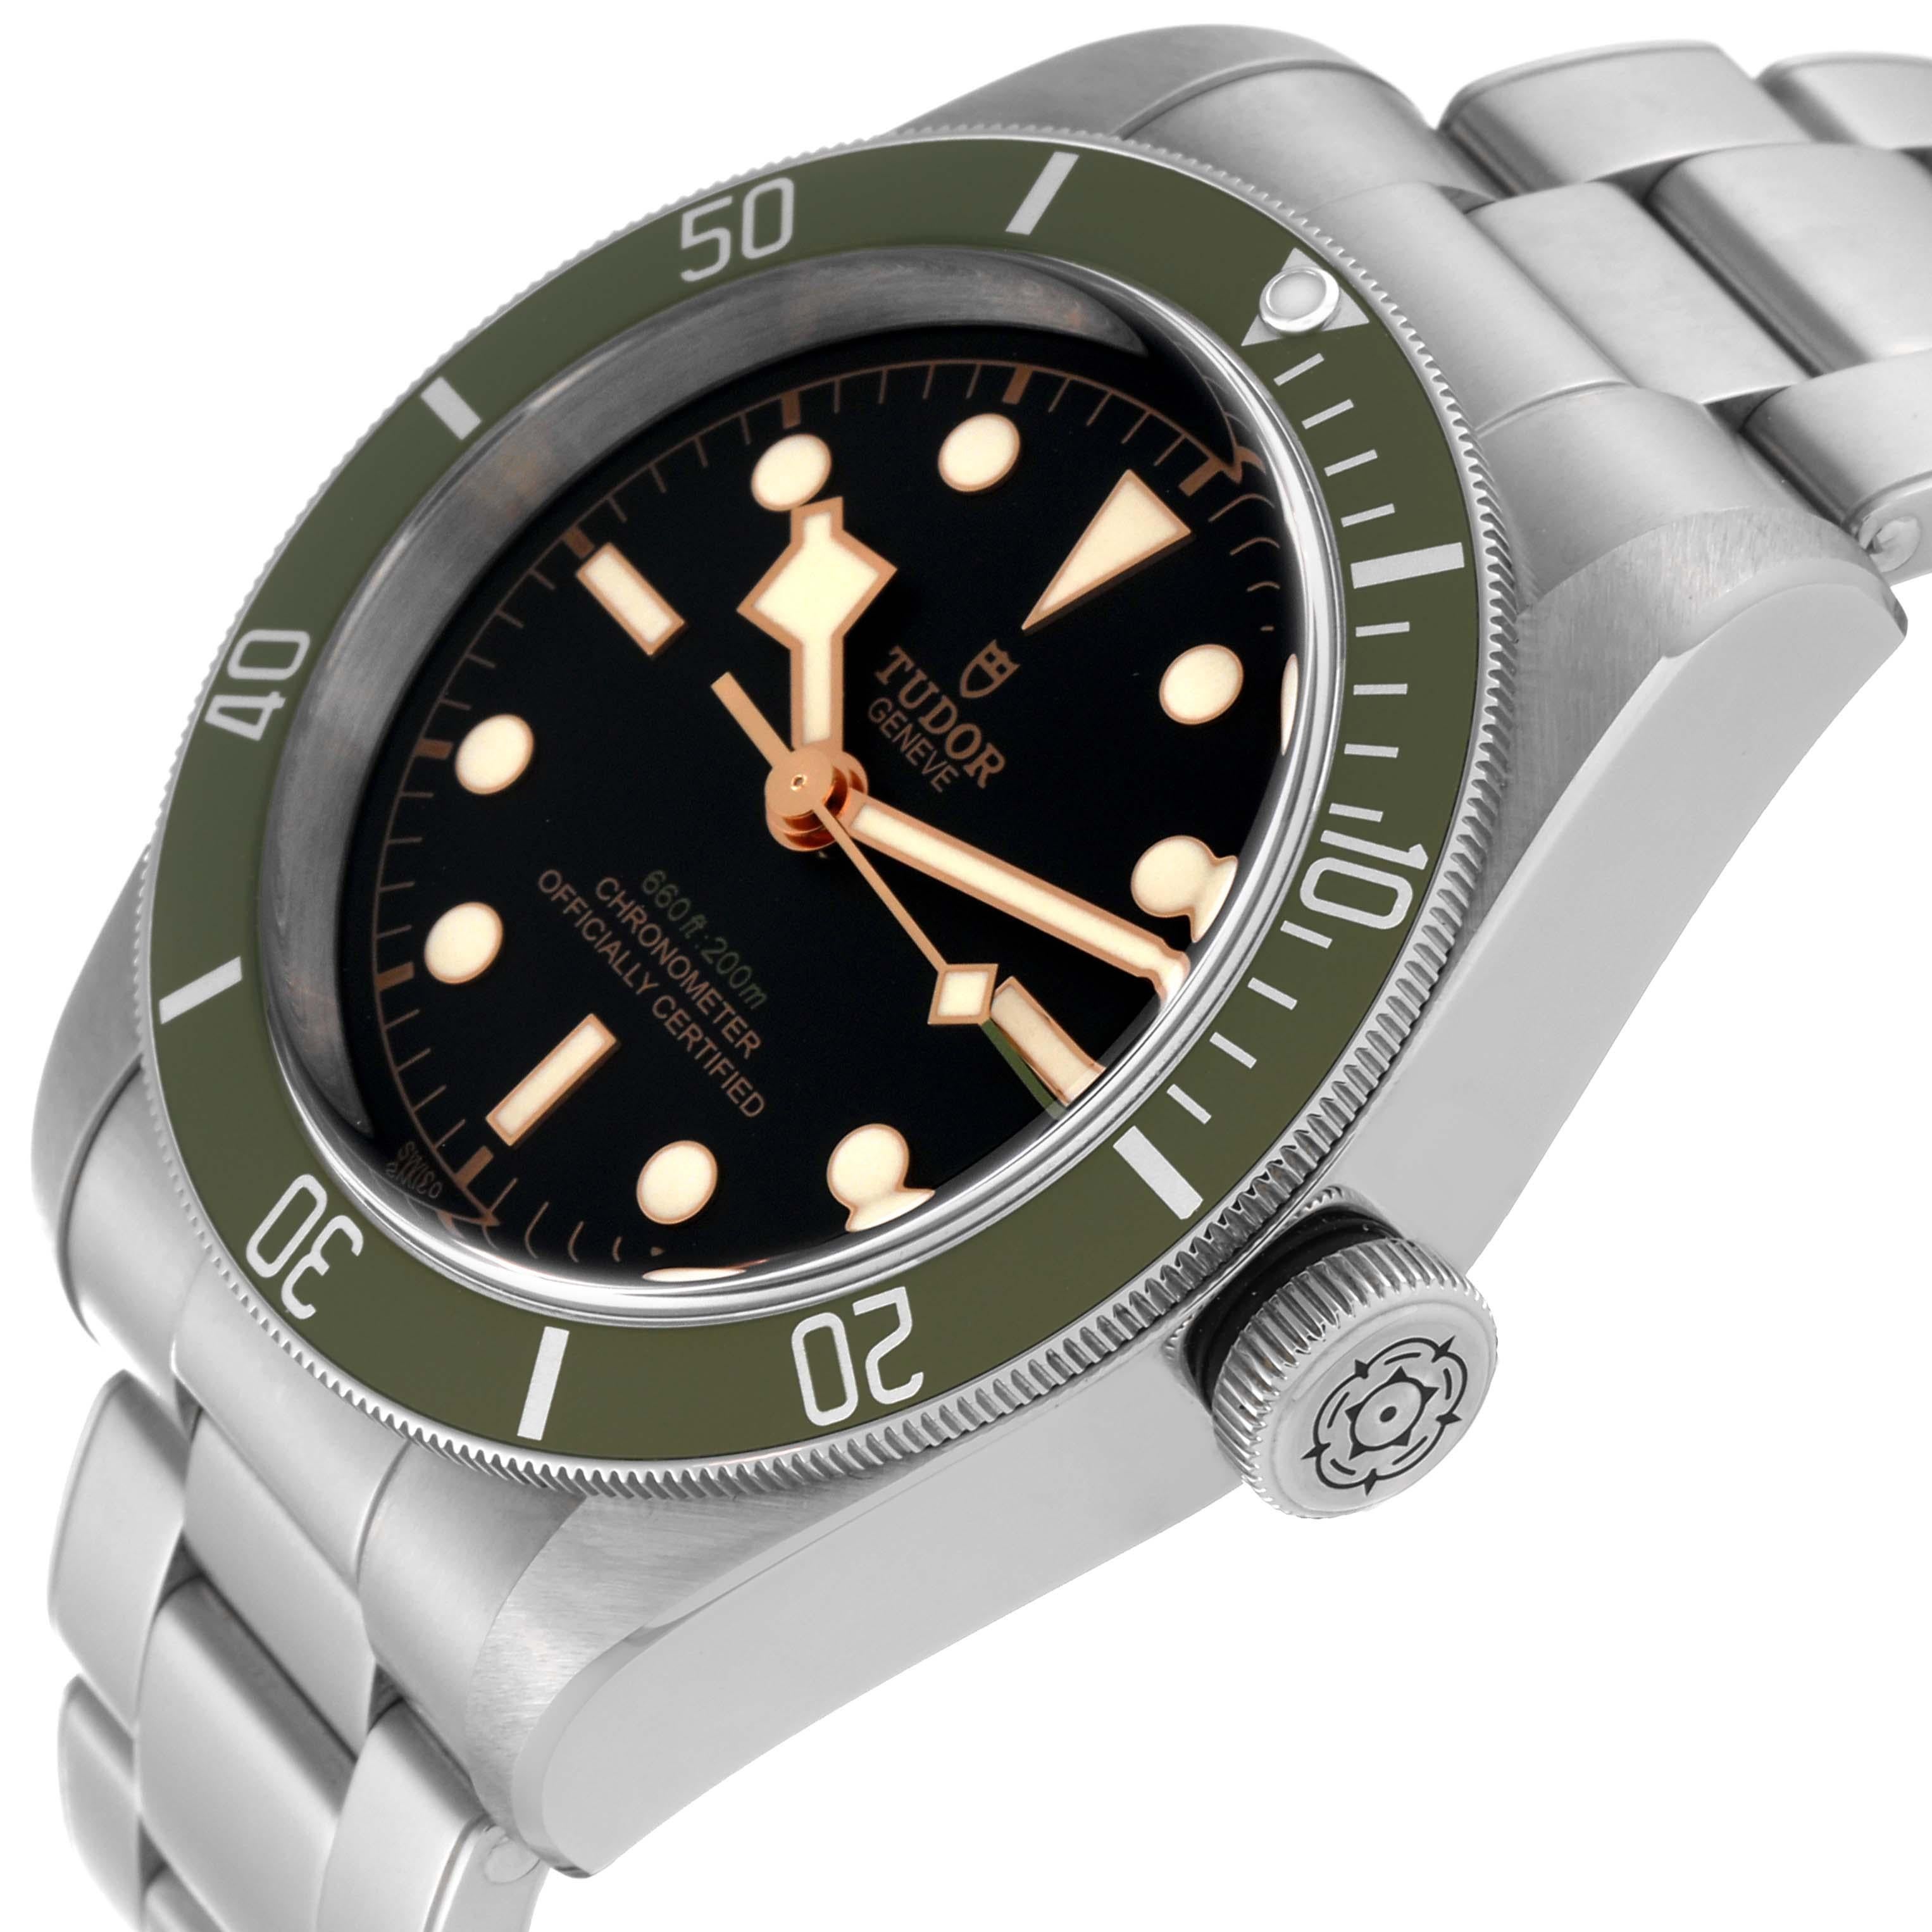 Tudor Heritage Black Bay Harrods Special Edition Steel Mens Watch 79230 Box Card. Automatic self-winding movement. Stainless steel oyster case 41.0 mm in diameter. Unidirectional rotatable stainless steel bezel with matte green insert. Scratch